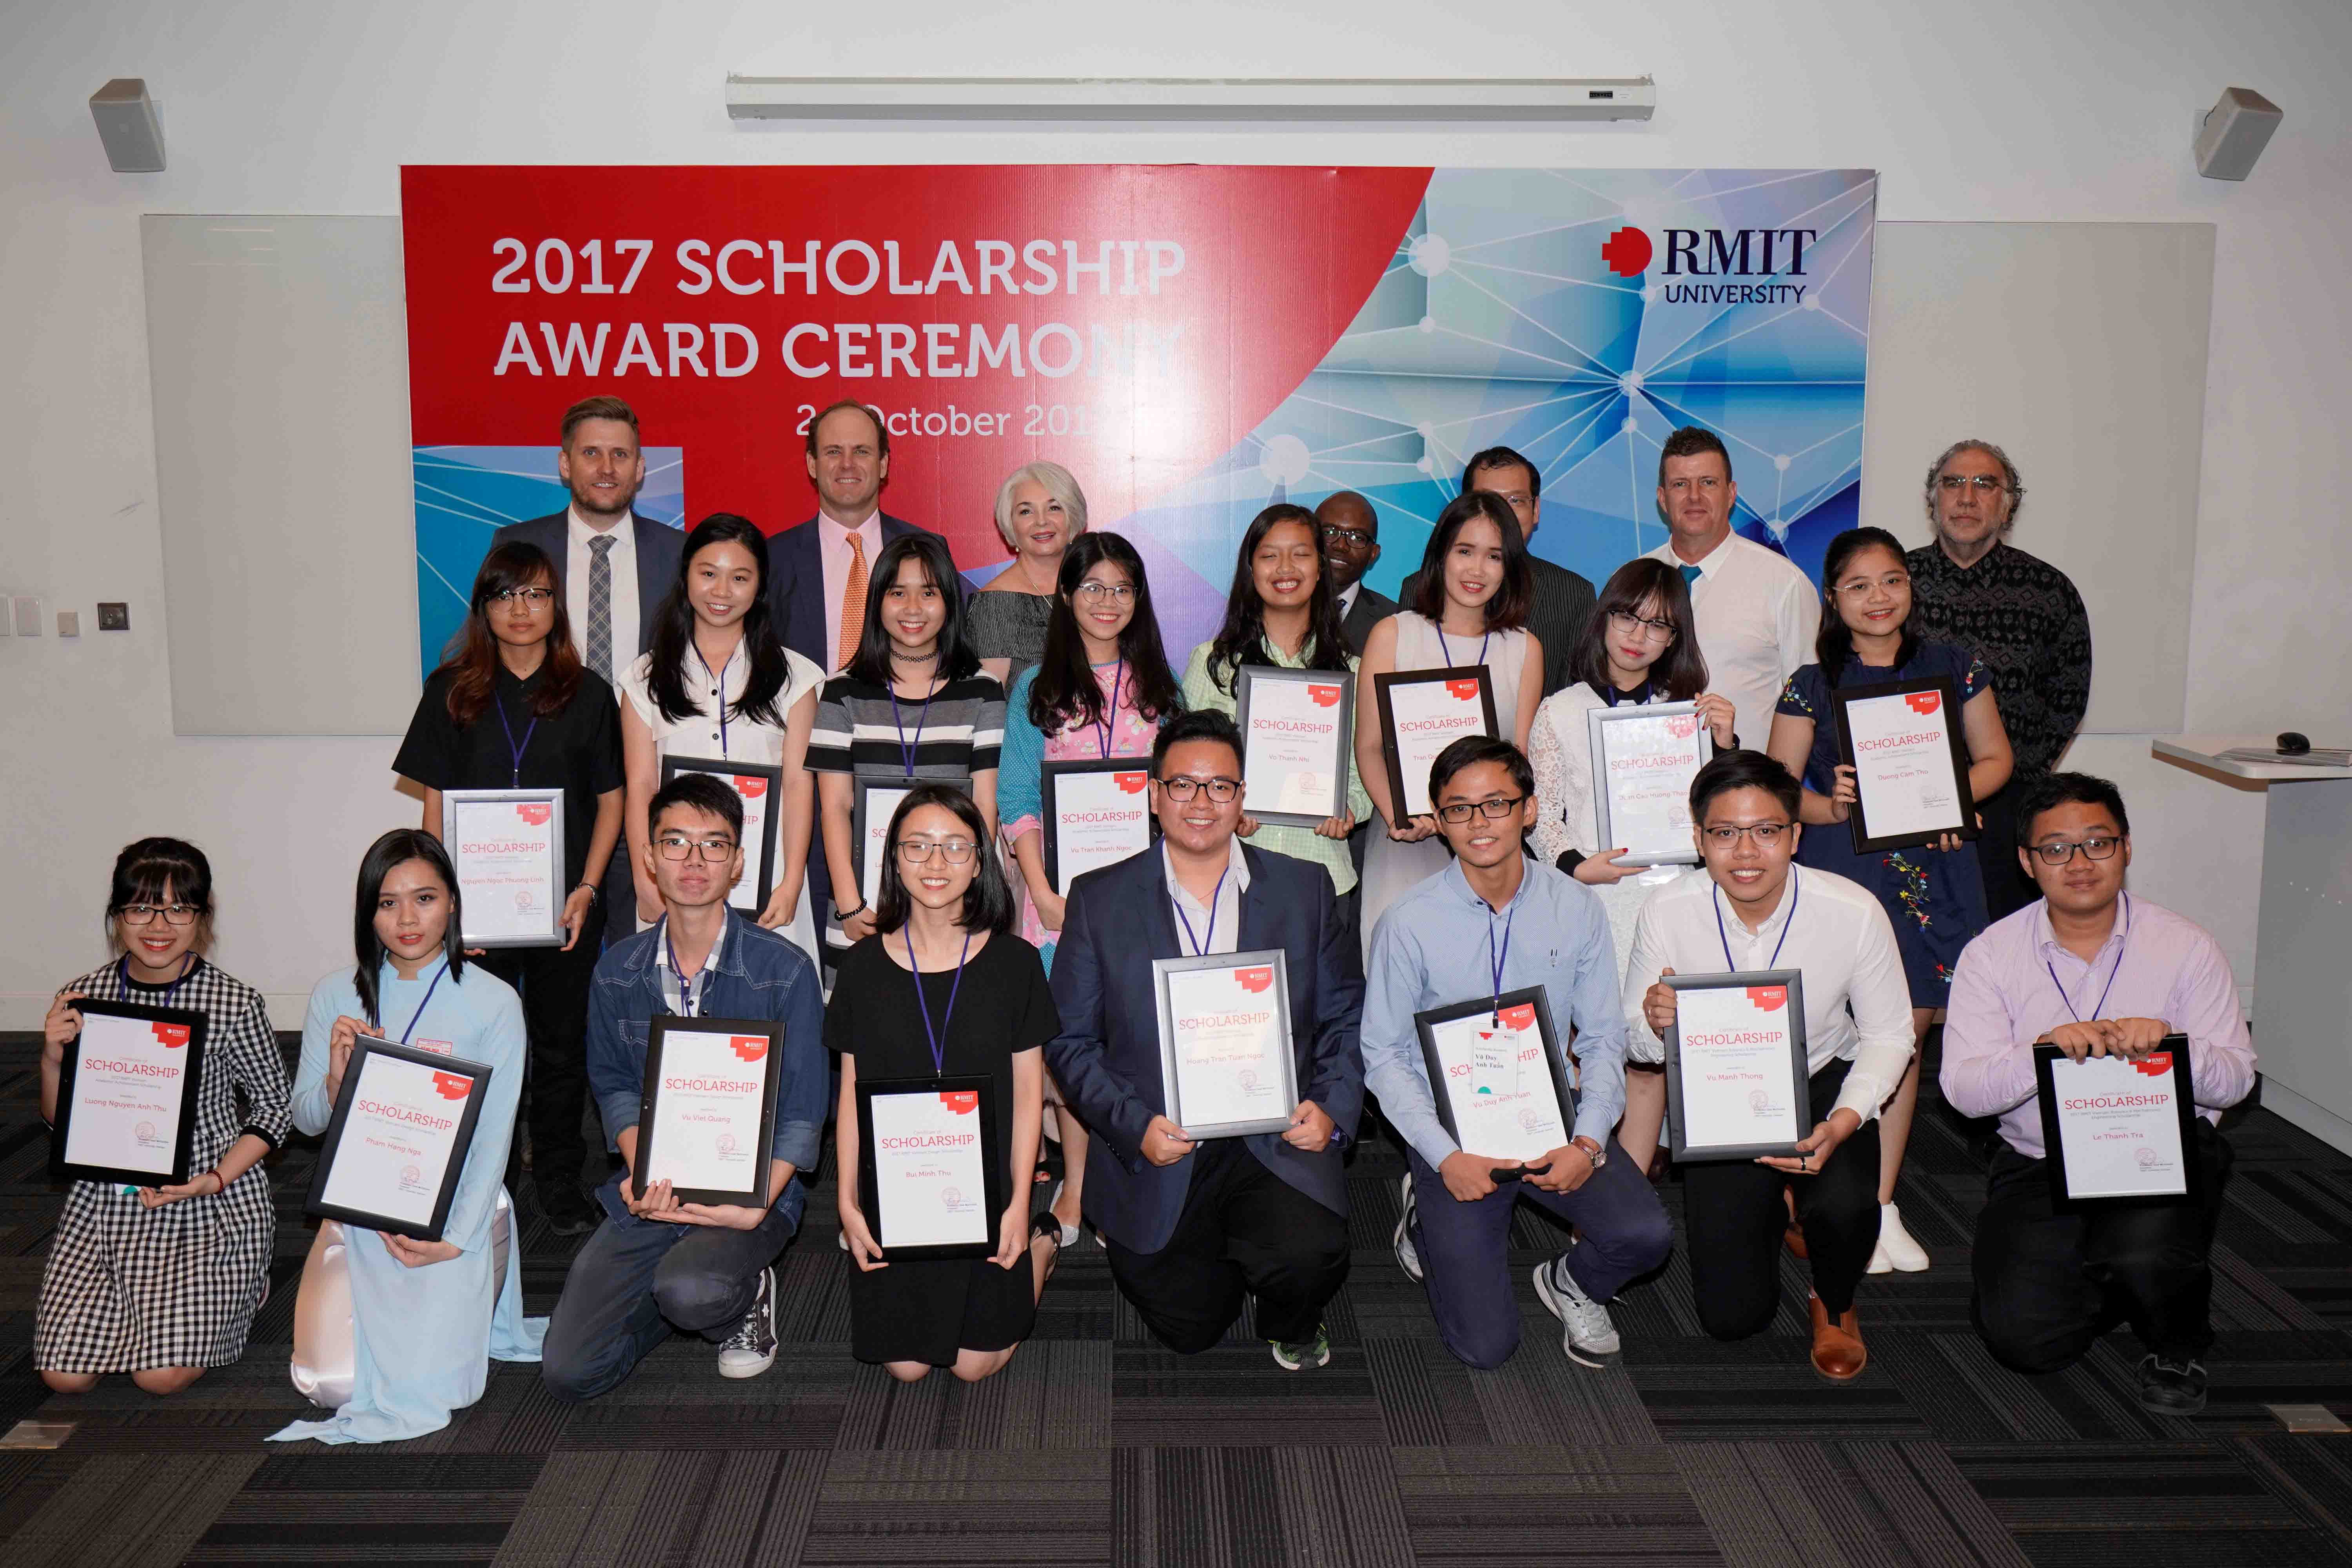 In the past 16 years, RMIT Vietnam has awarded more than one thousand scholarships to young people from all over Vietnam and around the world.